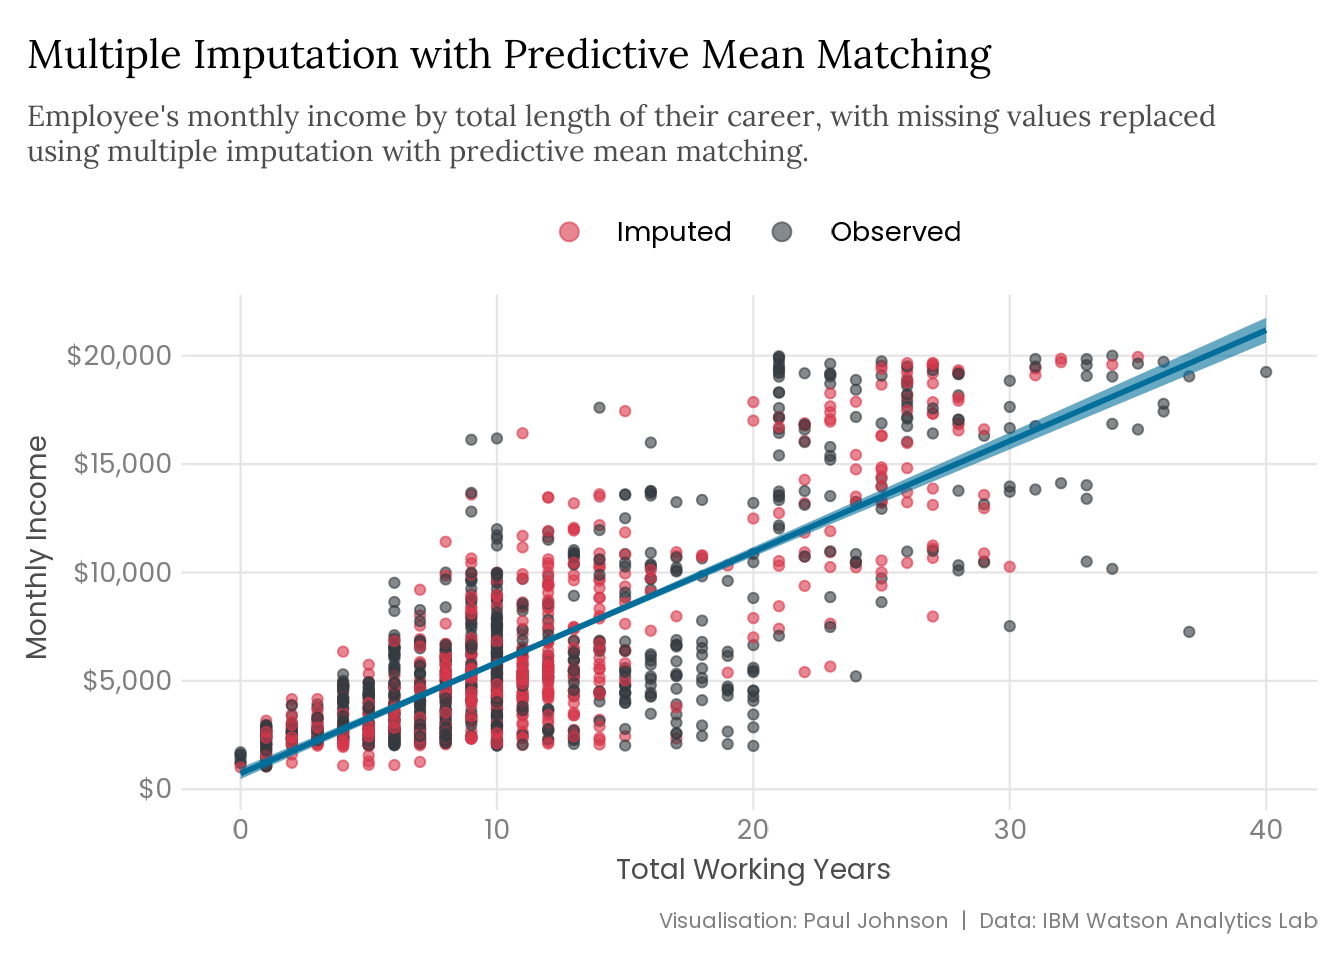 A scatterplot visualising the association between total working years and monthly income, with missing data resolved using multiple imputation with predictive mean matching. The plot shows a strong positive association between career length and monthly income. Imputed values appear to follow a very similar pattern to observed values, and the multiple imputation plot looks very similar to the plot of the original data. 